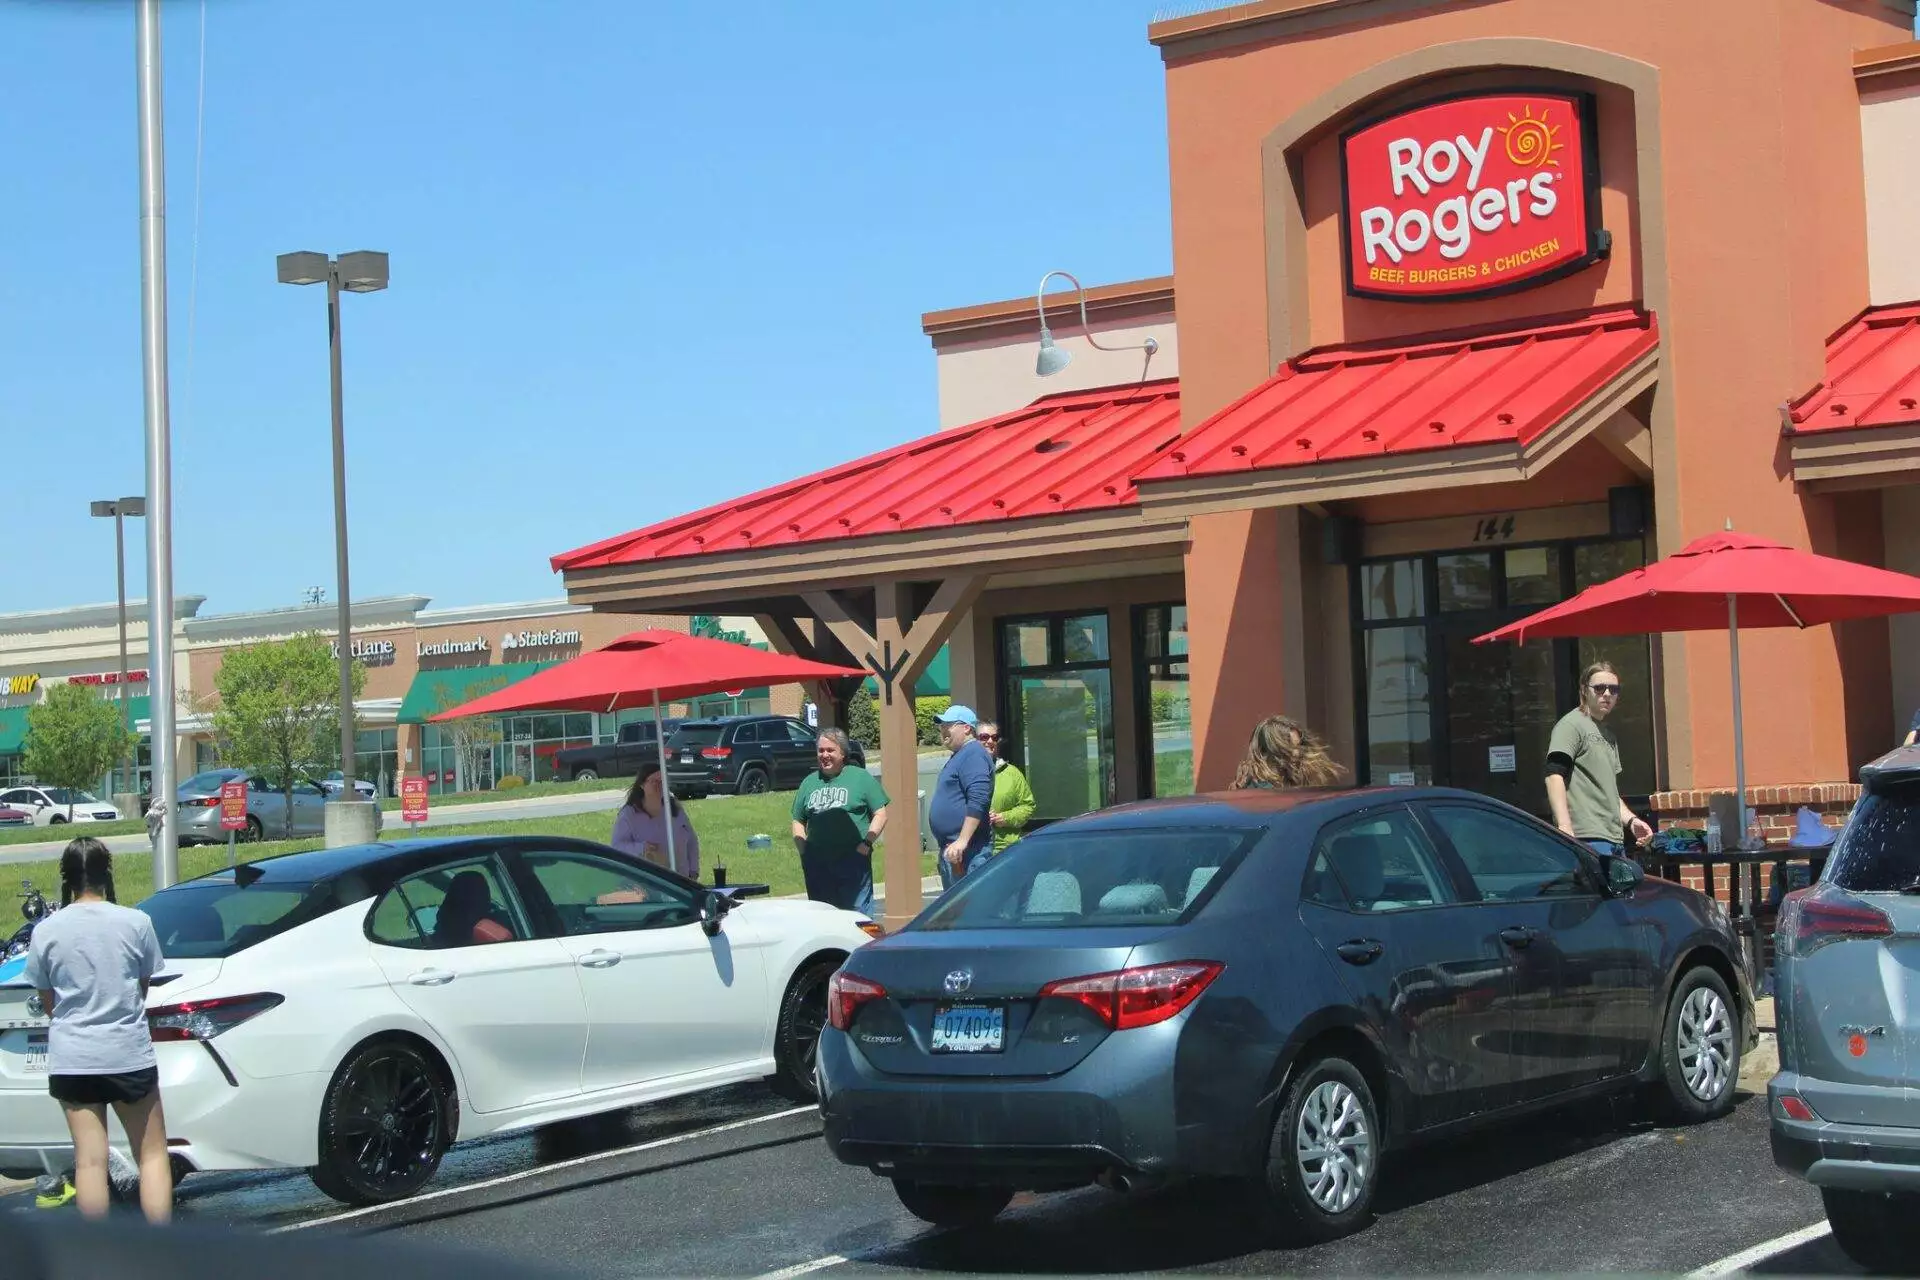 Cars parked outside a roy rogers restaurant on a sunny day, with people walking near the entrance under red umbrellas.